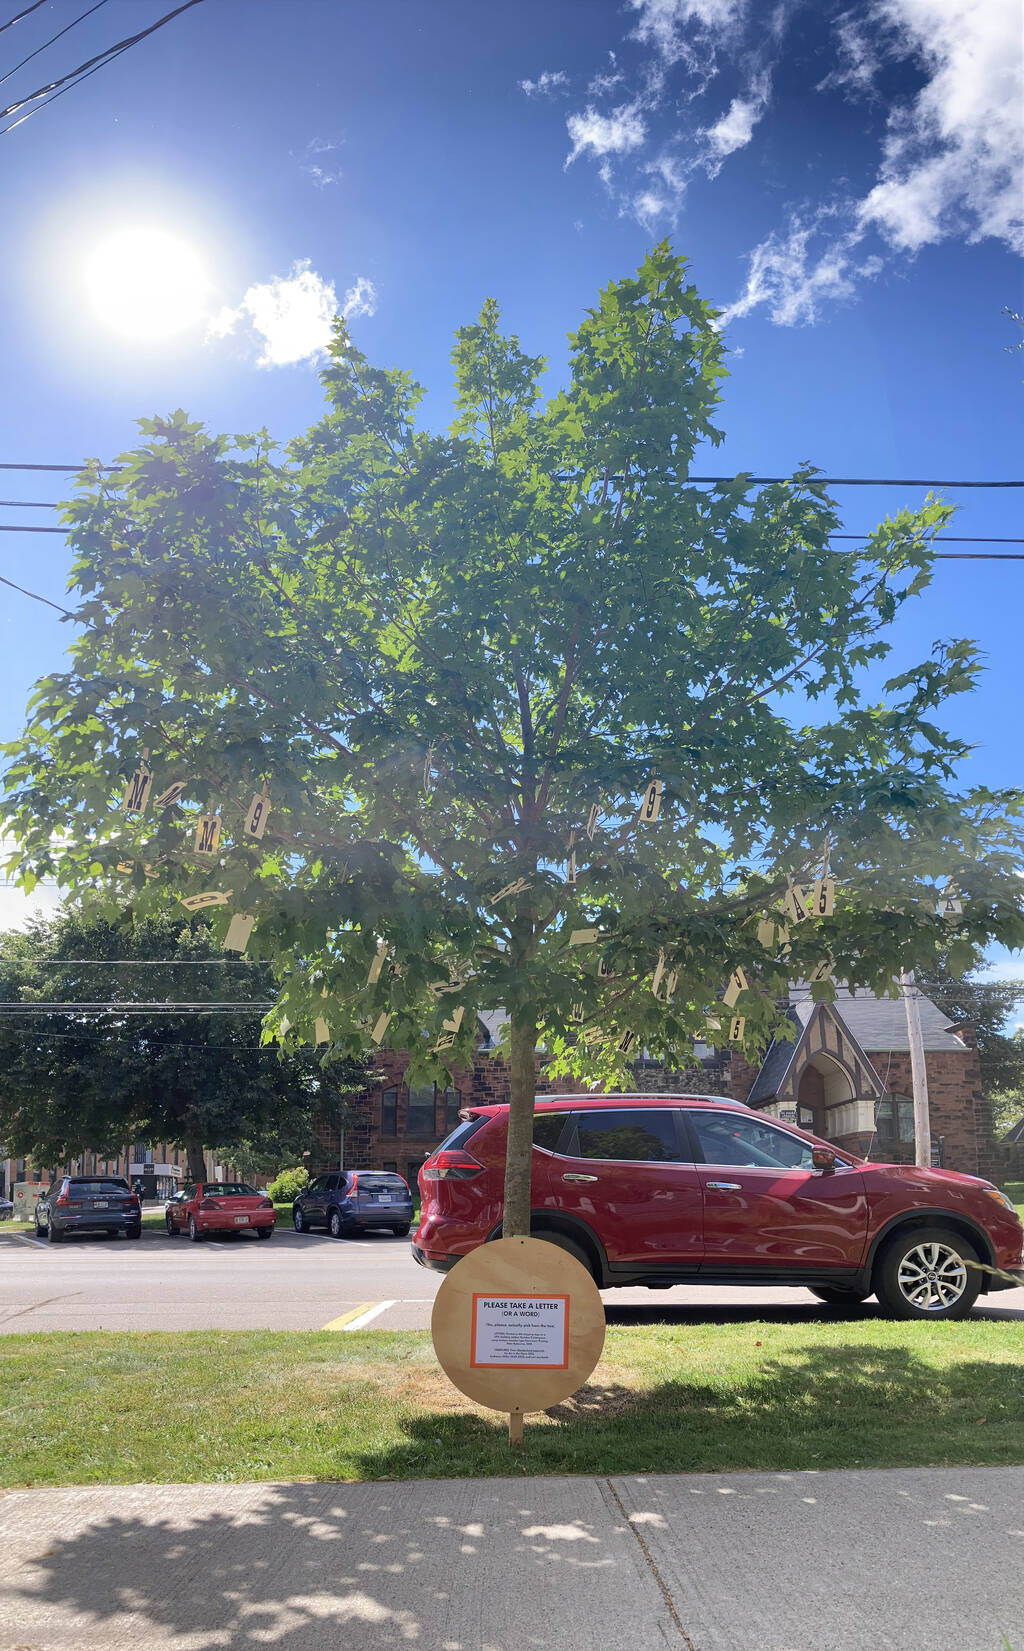 Vertical panorama of the tree with the letters and sign.